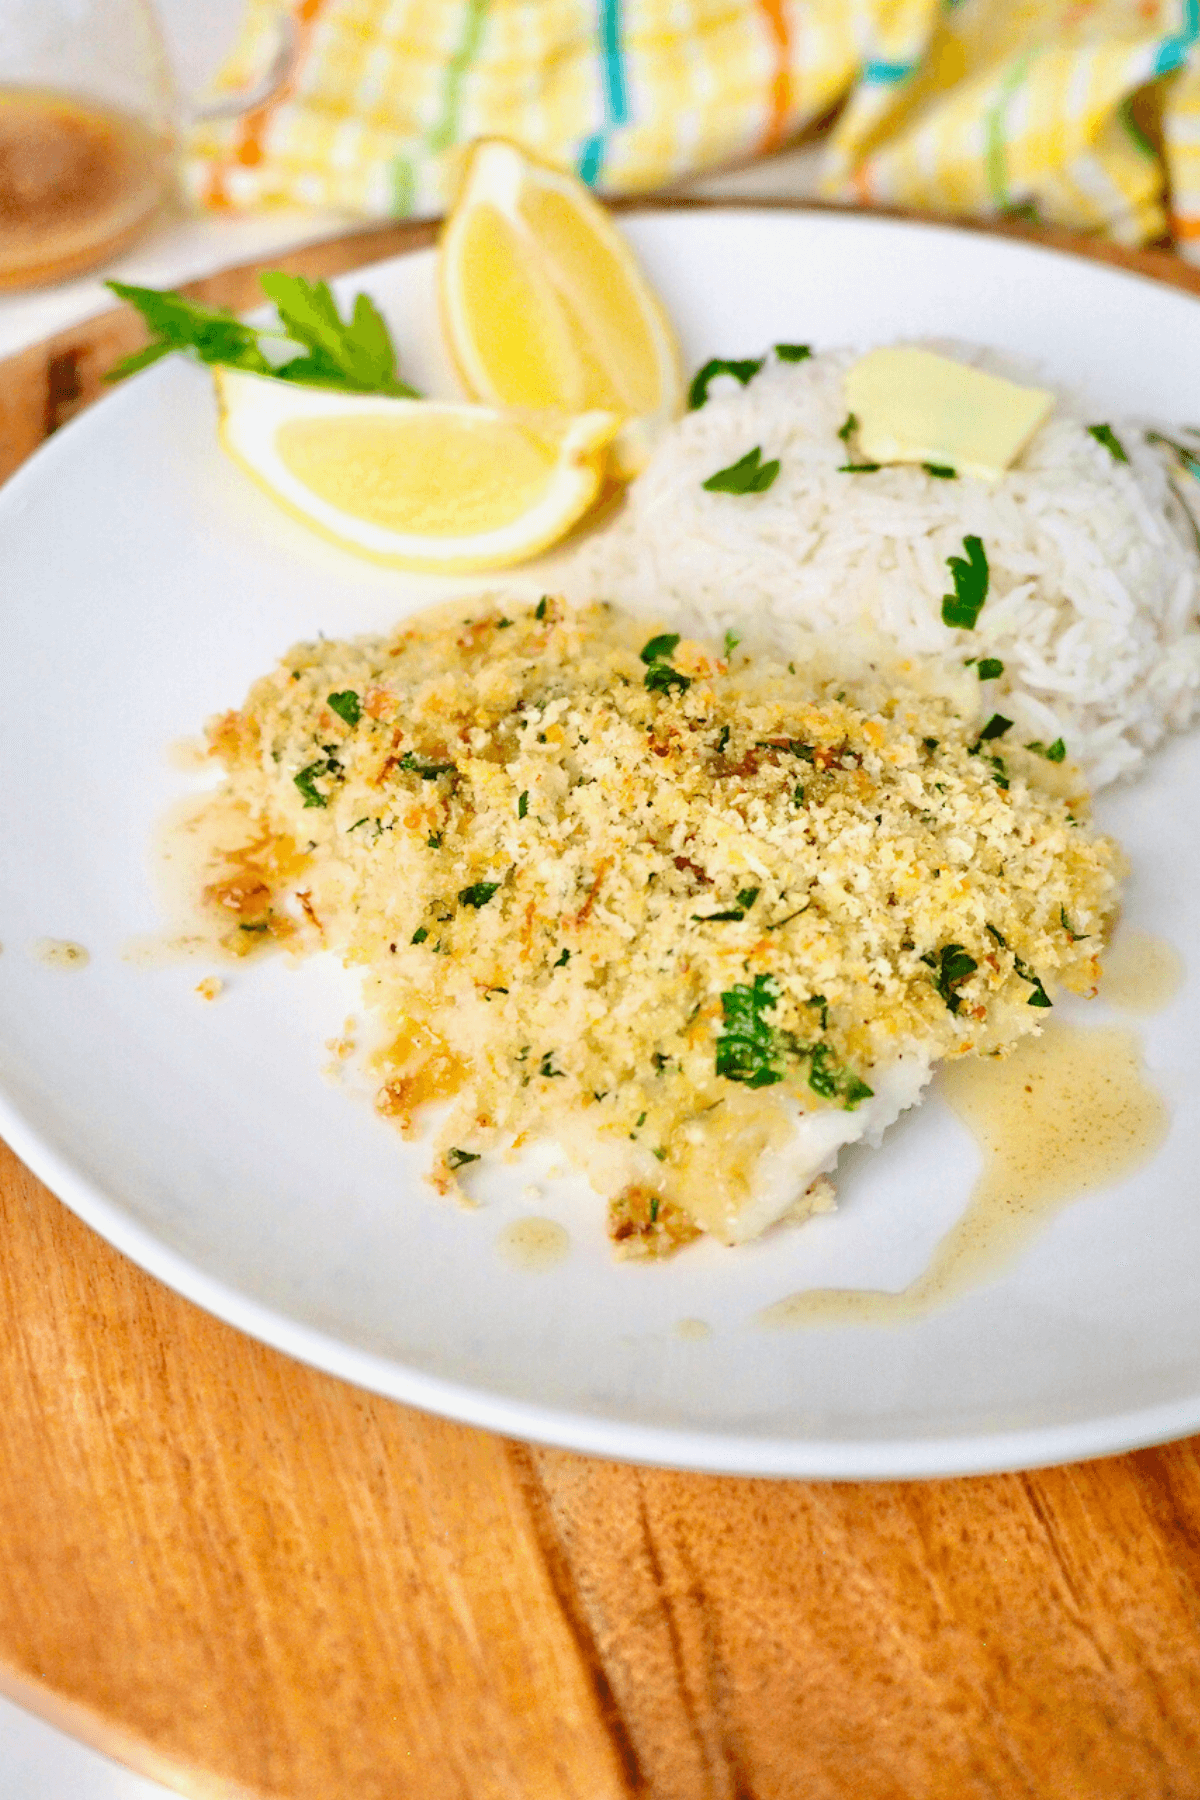 Panko Parmesan Baked Cod recipe with lemon butter sauce on a plate with rice and lemon.